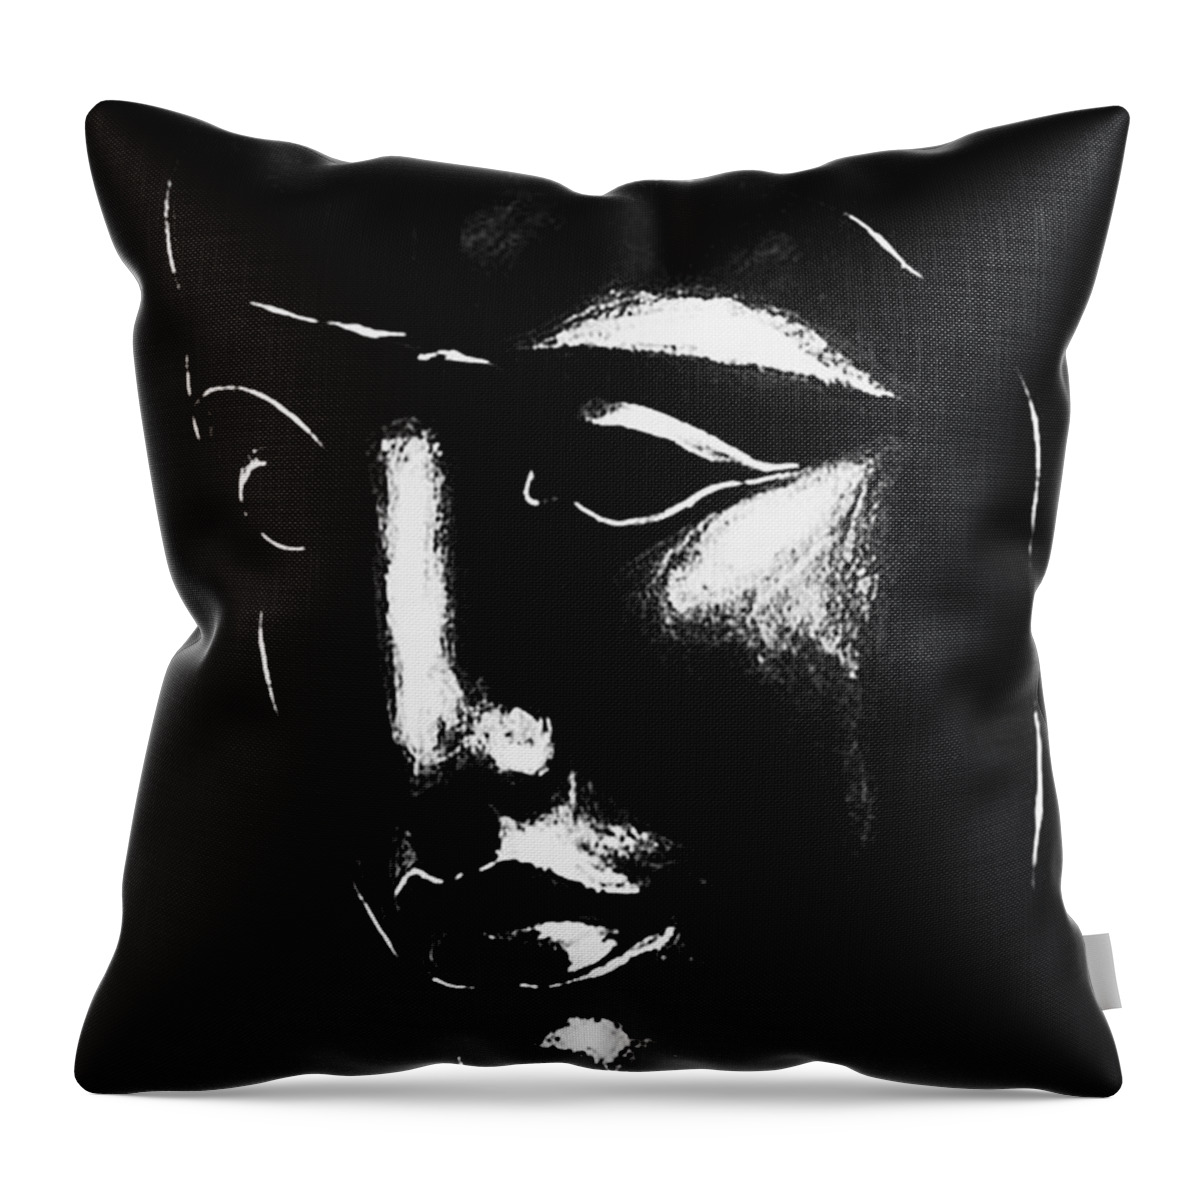 Portrait Throw Pillow featuring the painting Portrait #1 by Hartmut Jager